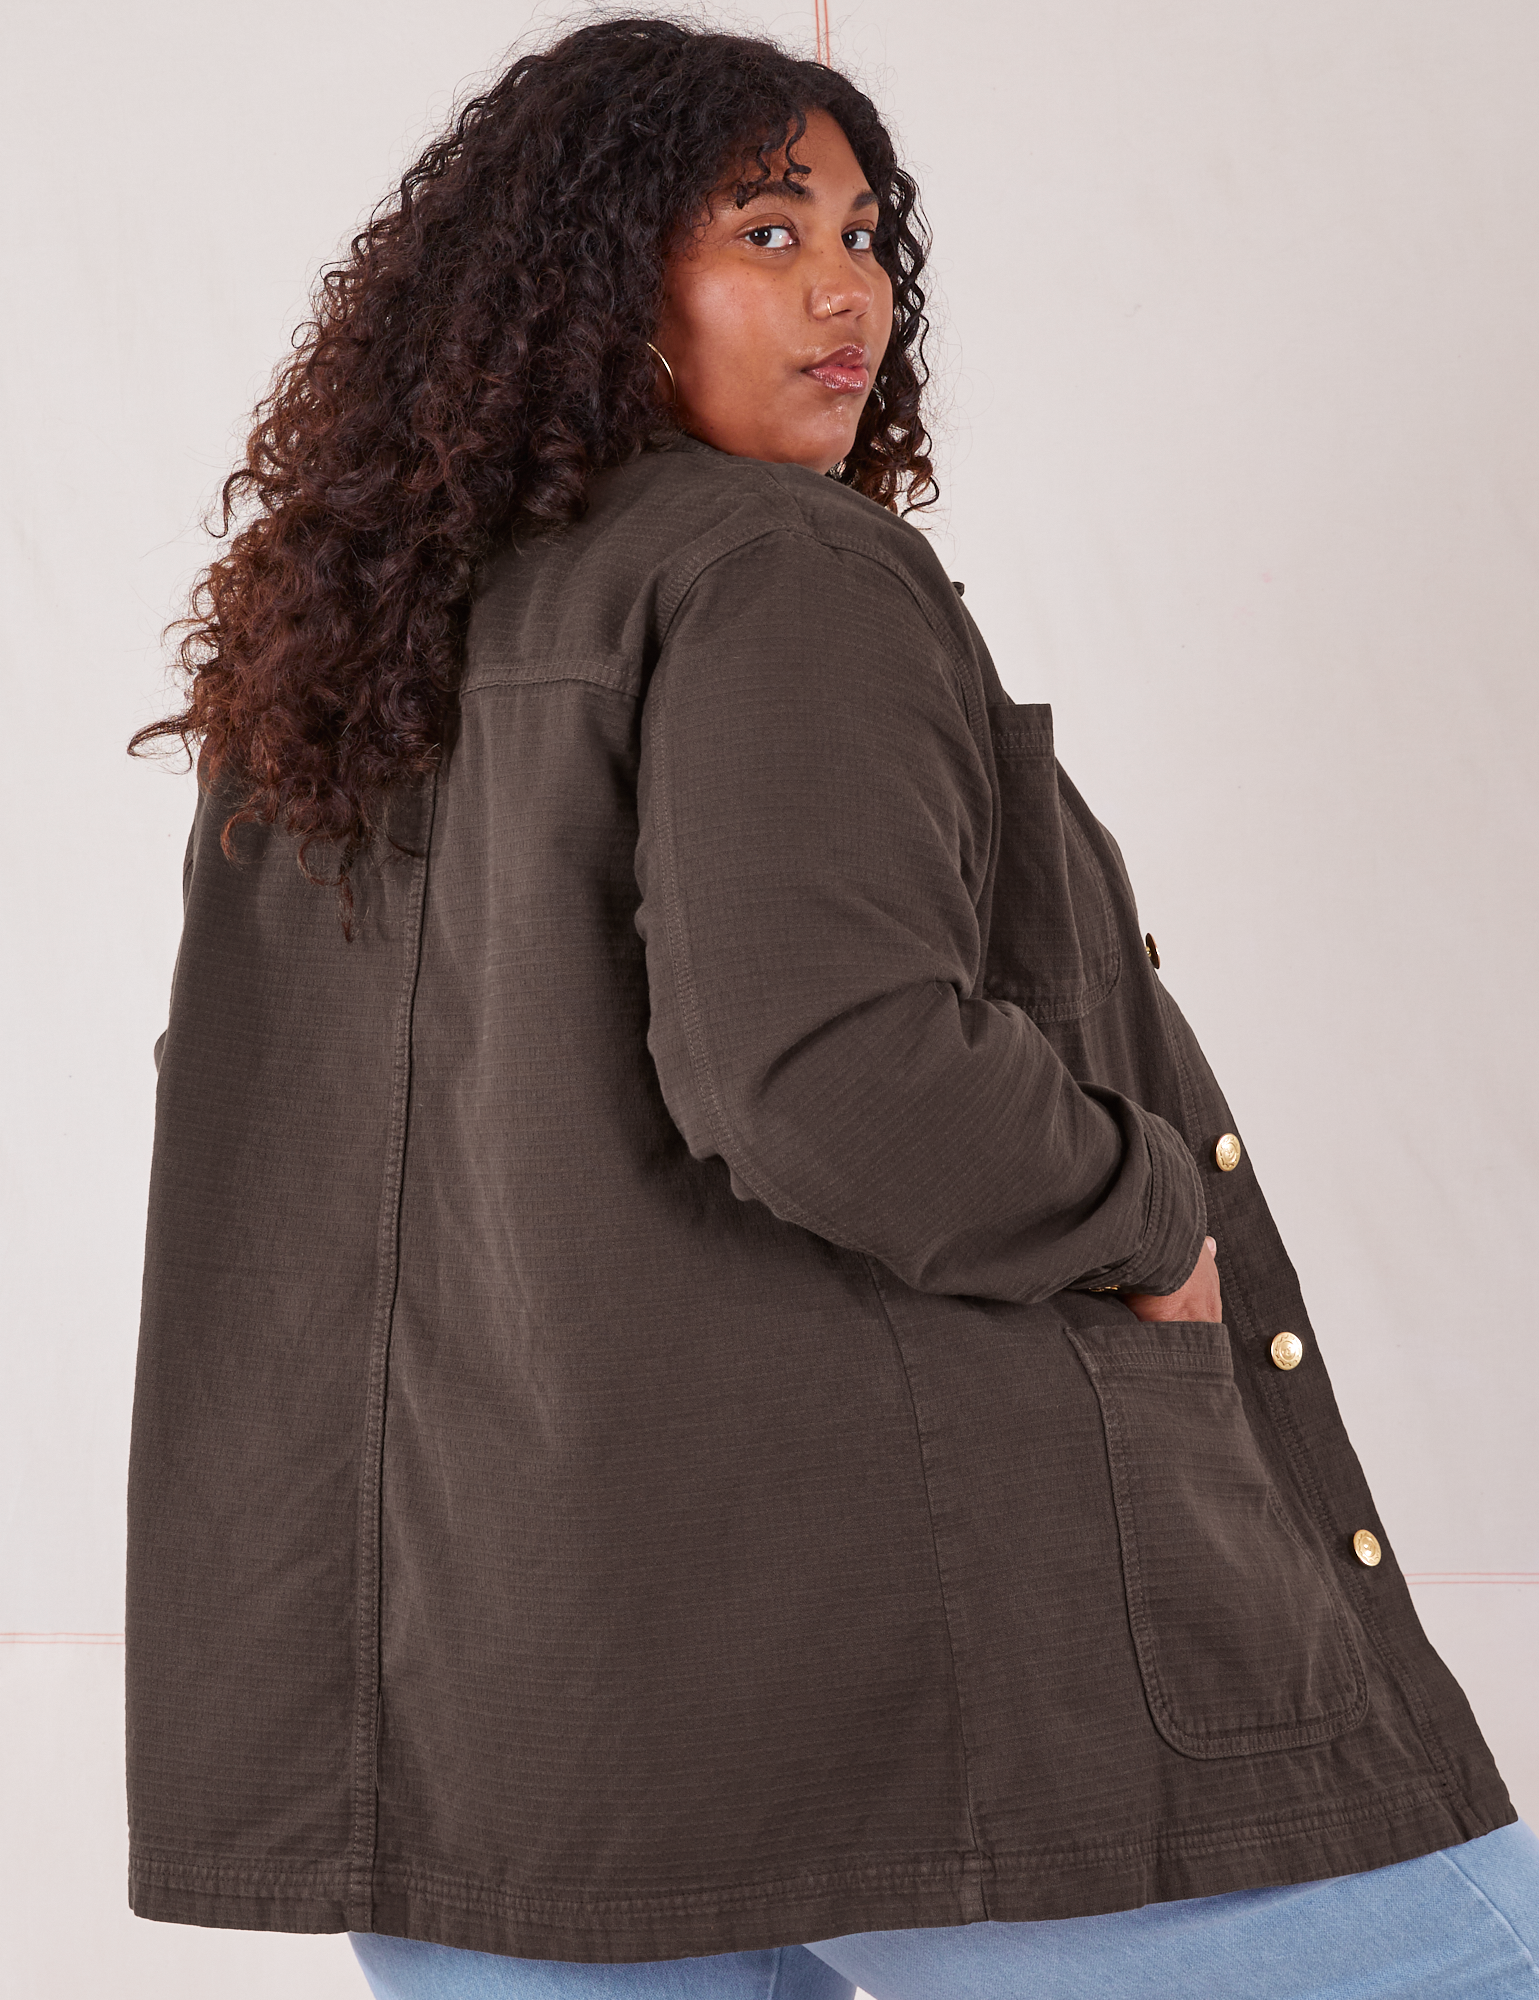 Field Coat in Espresso Brown angled back view on Morgan